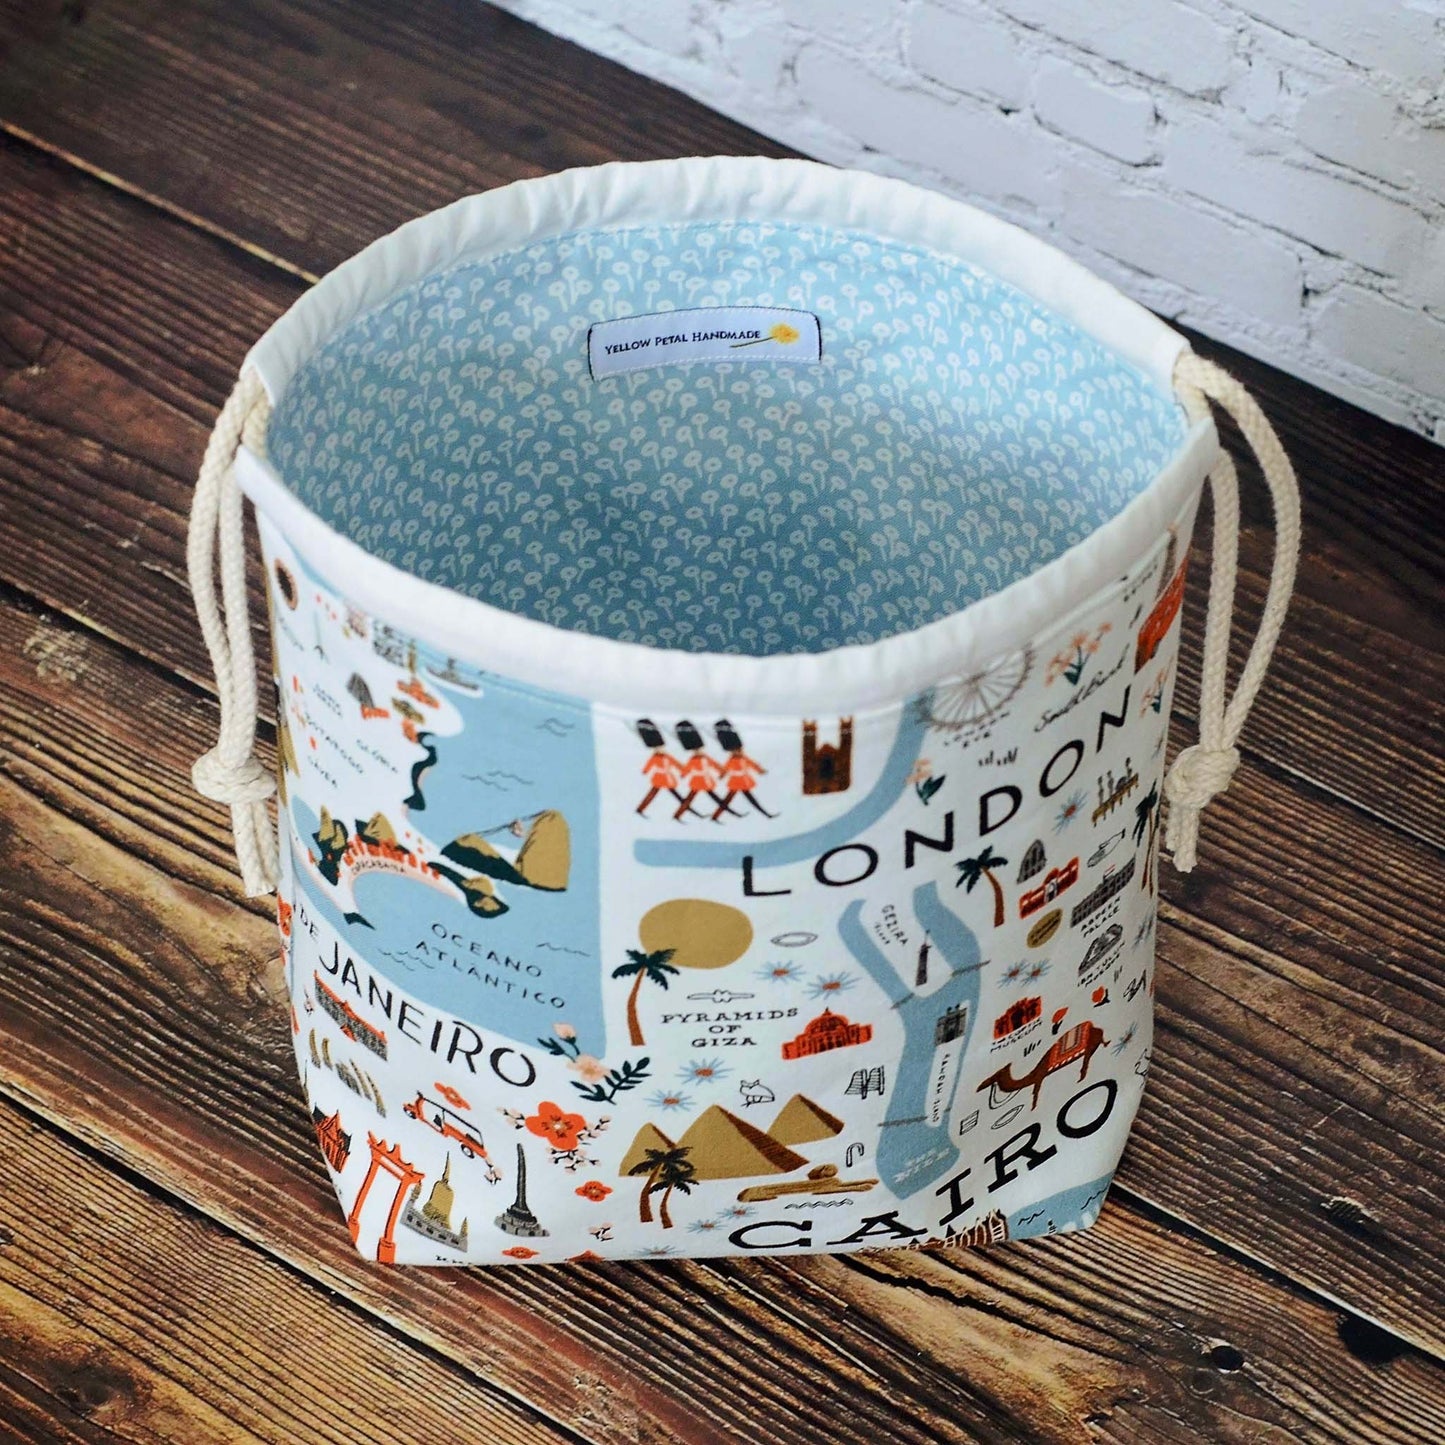 Small drawstring sock knitting bag in pretty travel fabric from the Bon Voyage collection by Rifle Paper Co.  Made in Canada by Yellow Petal Handmade.